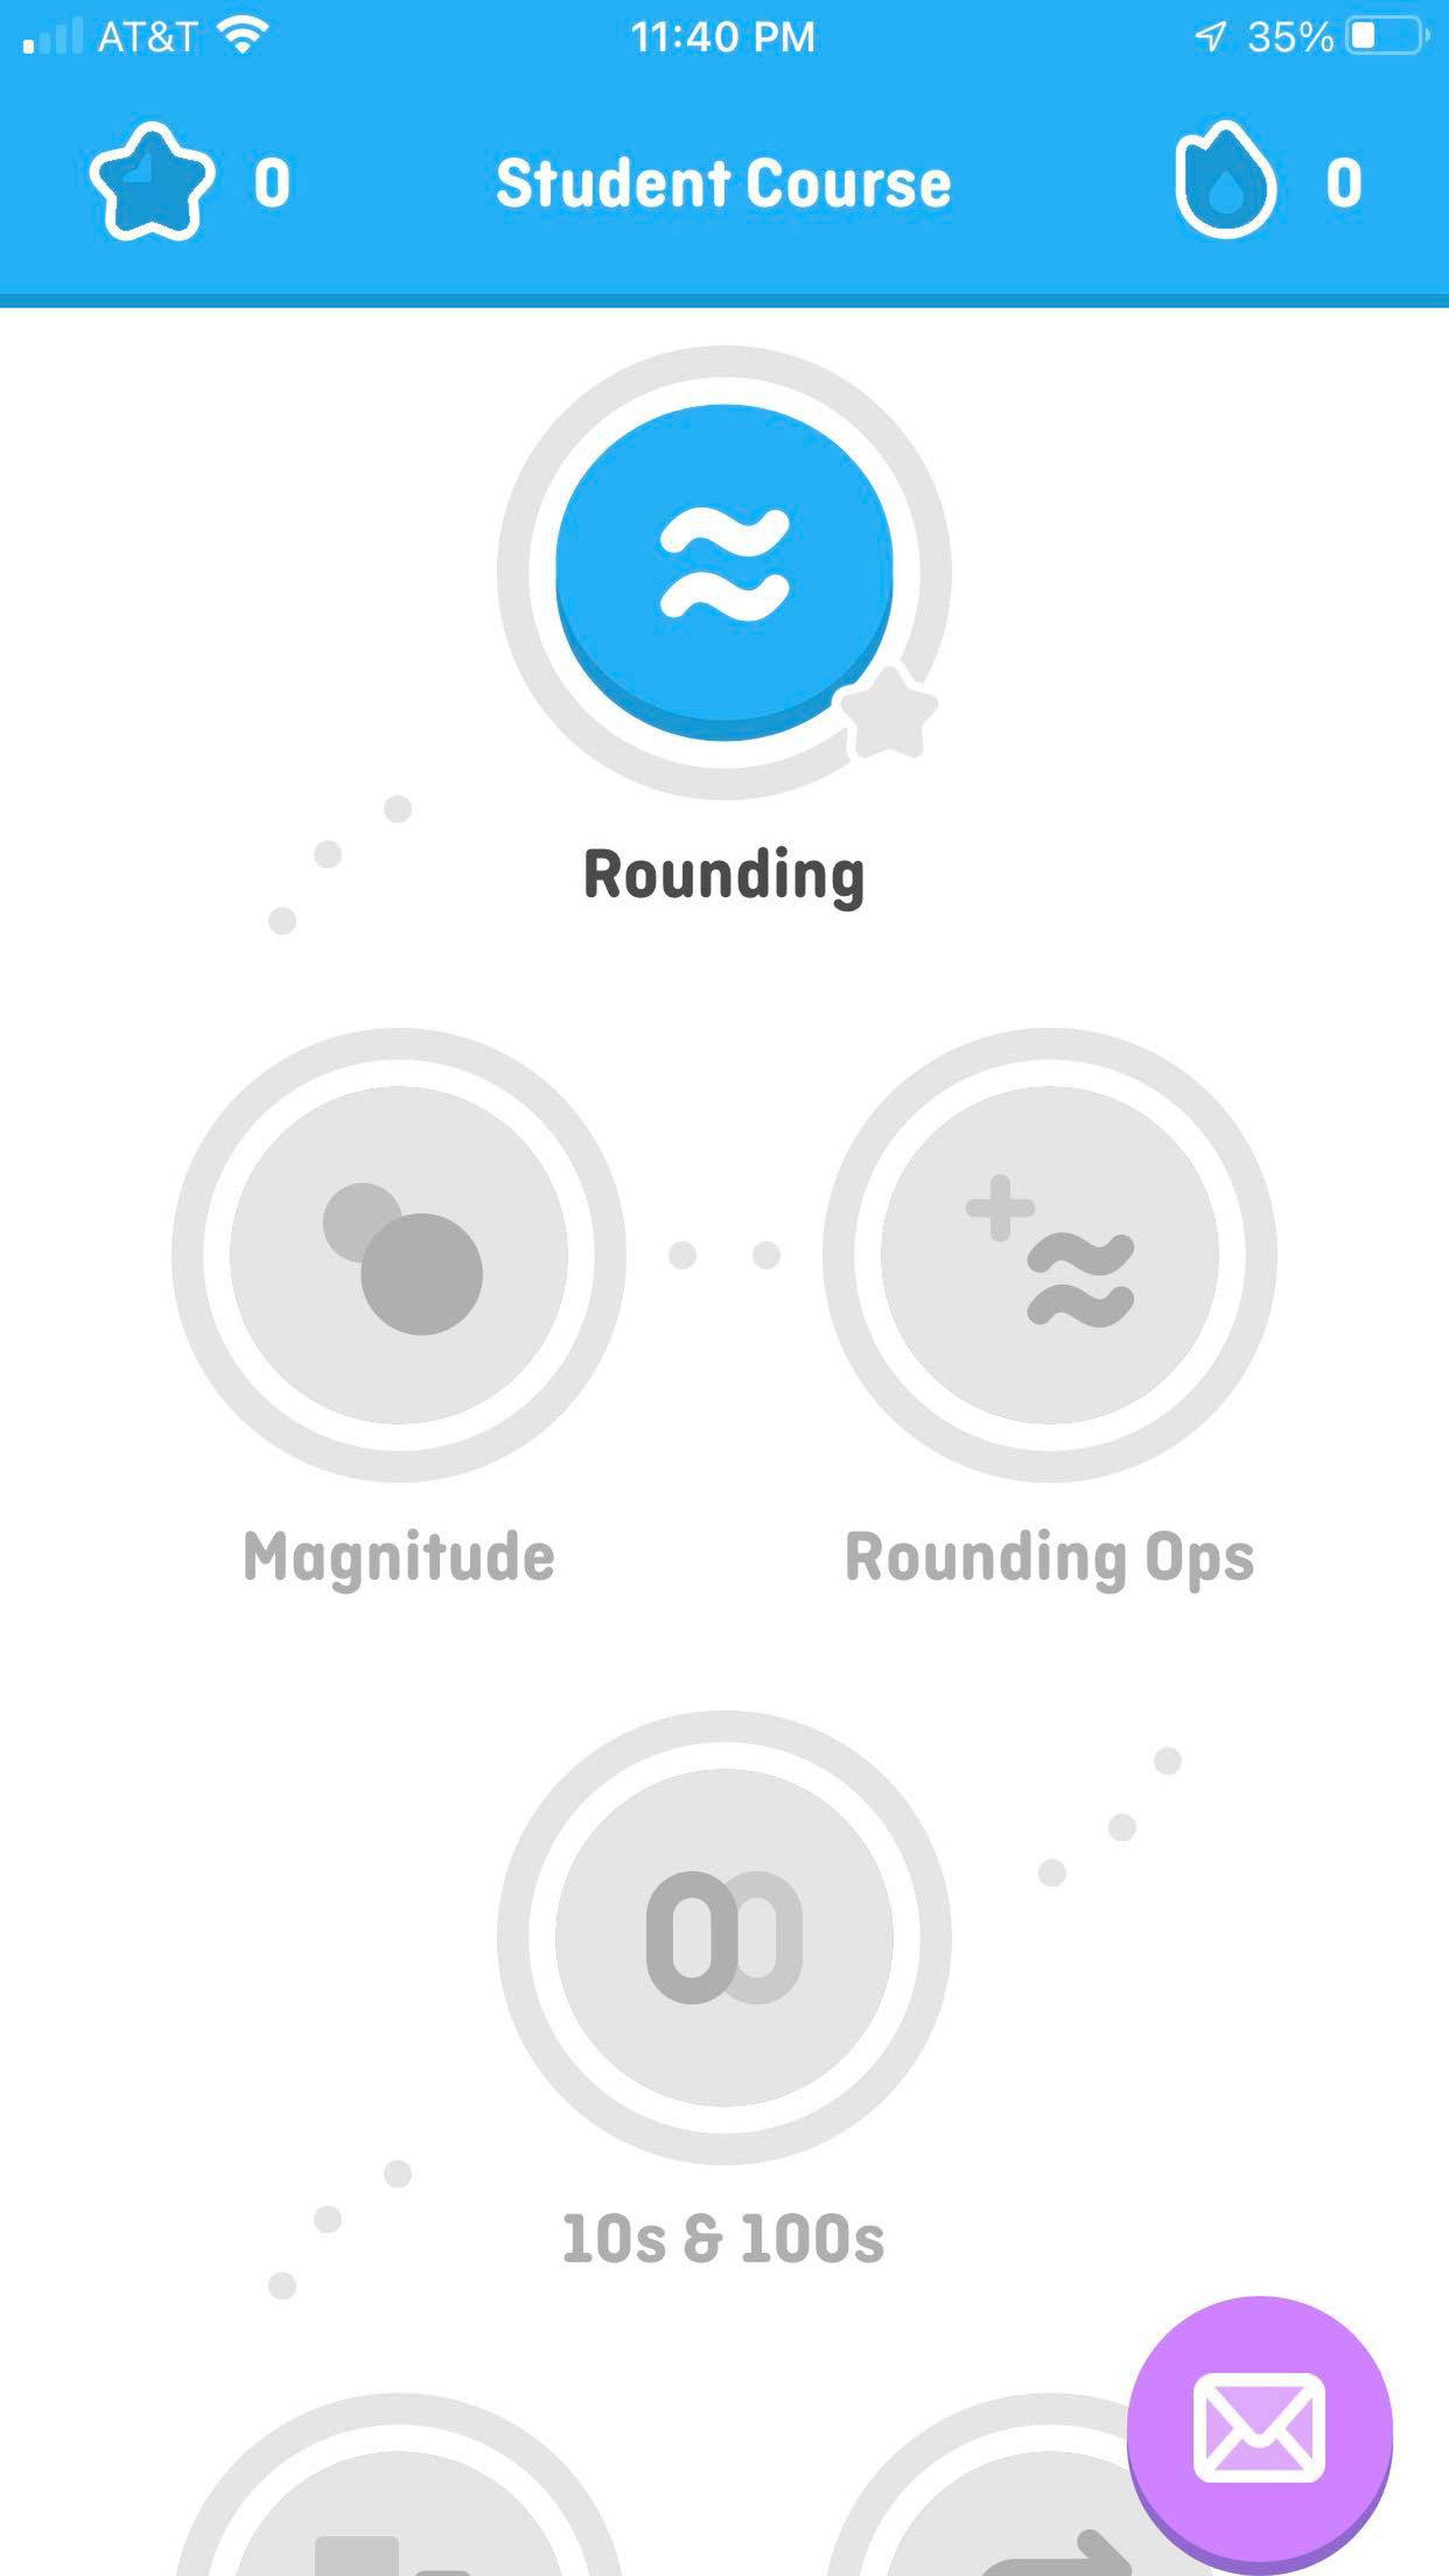 A screenshot of Duolingo Math including Rounding, Magntiude, Rounding Ops, and 10s lessons.